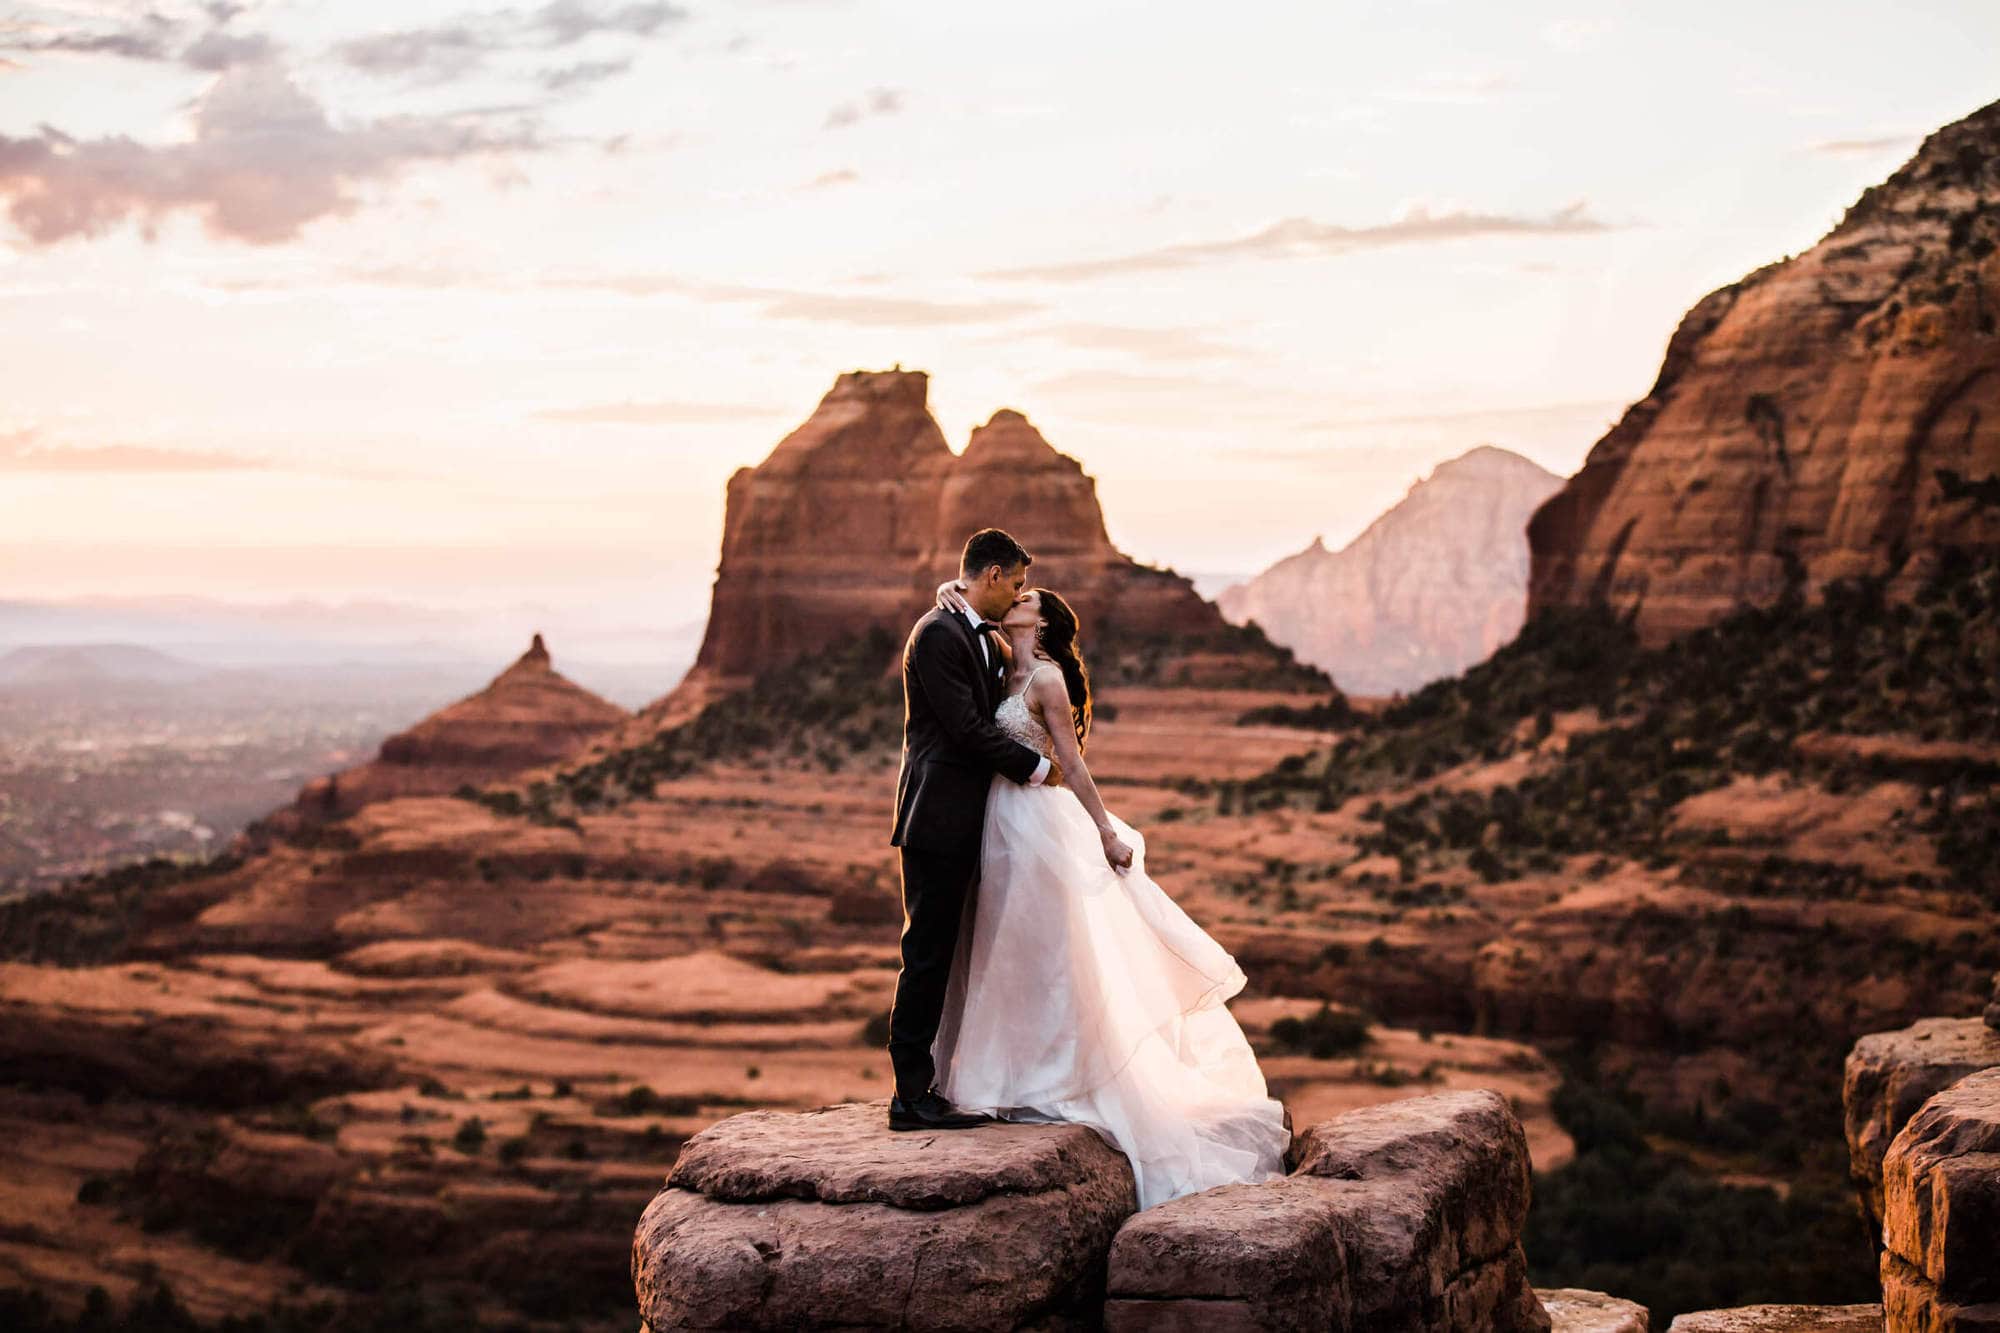 2020 was something else! Here are some of my favorite imagees from the adventure weddings and elopements to inspire your elopement planning and dreams.